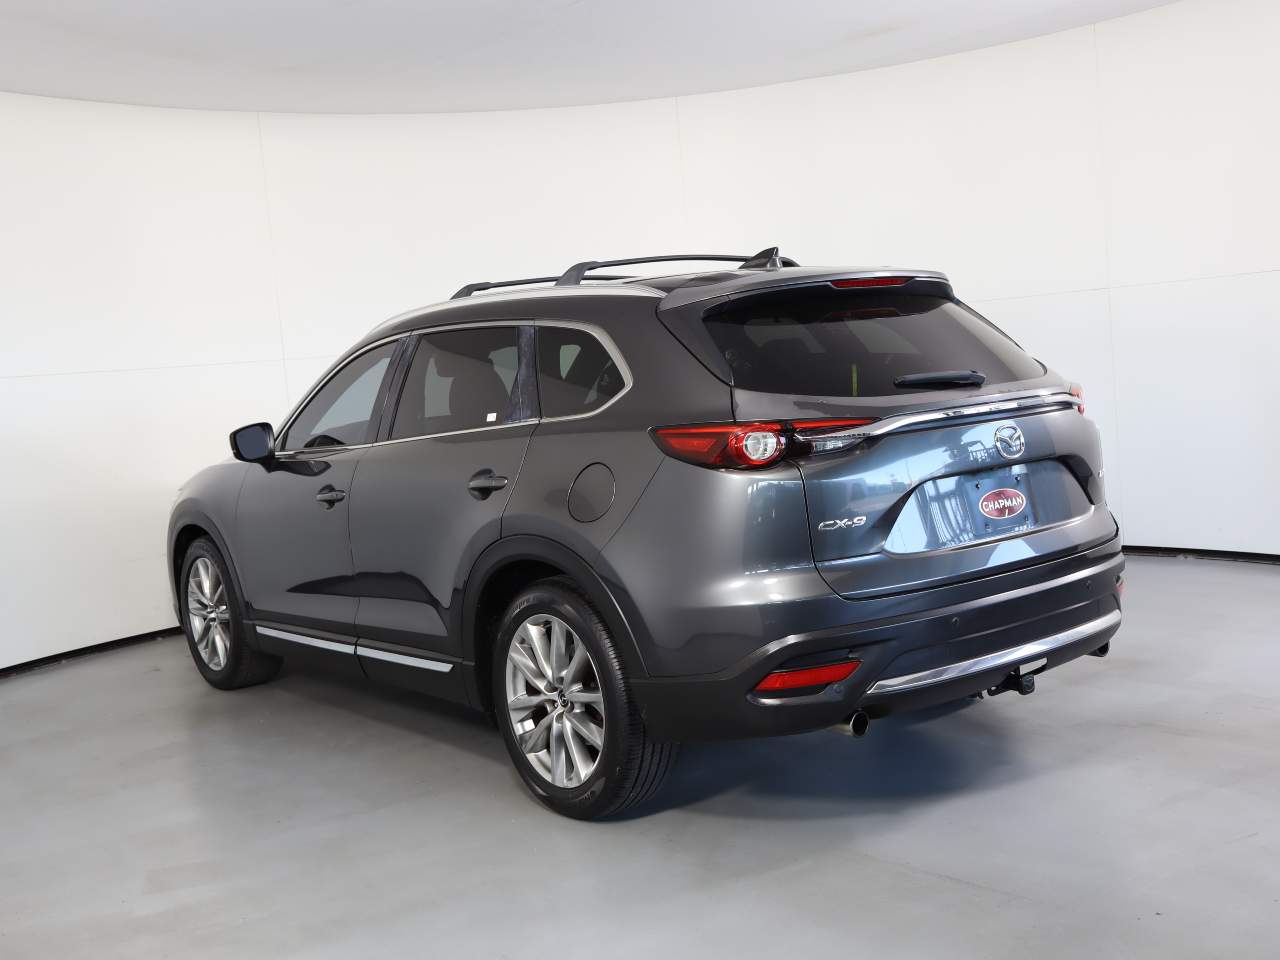 Used 2016 Mazda CX-9 Grand Touring with VIN JM3TCADY3G0116224 for sale in Tucson, AZ